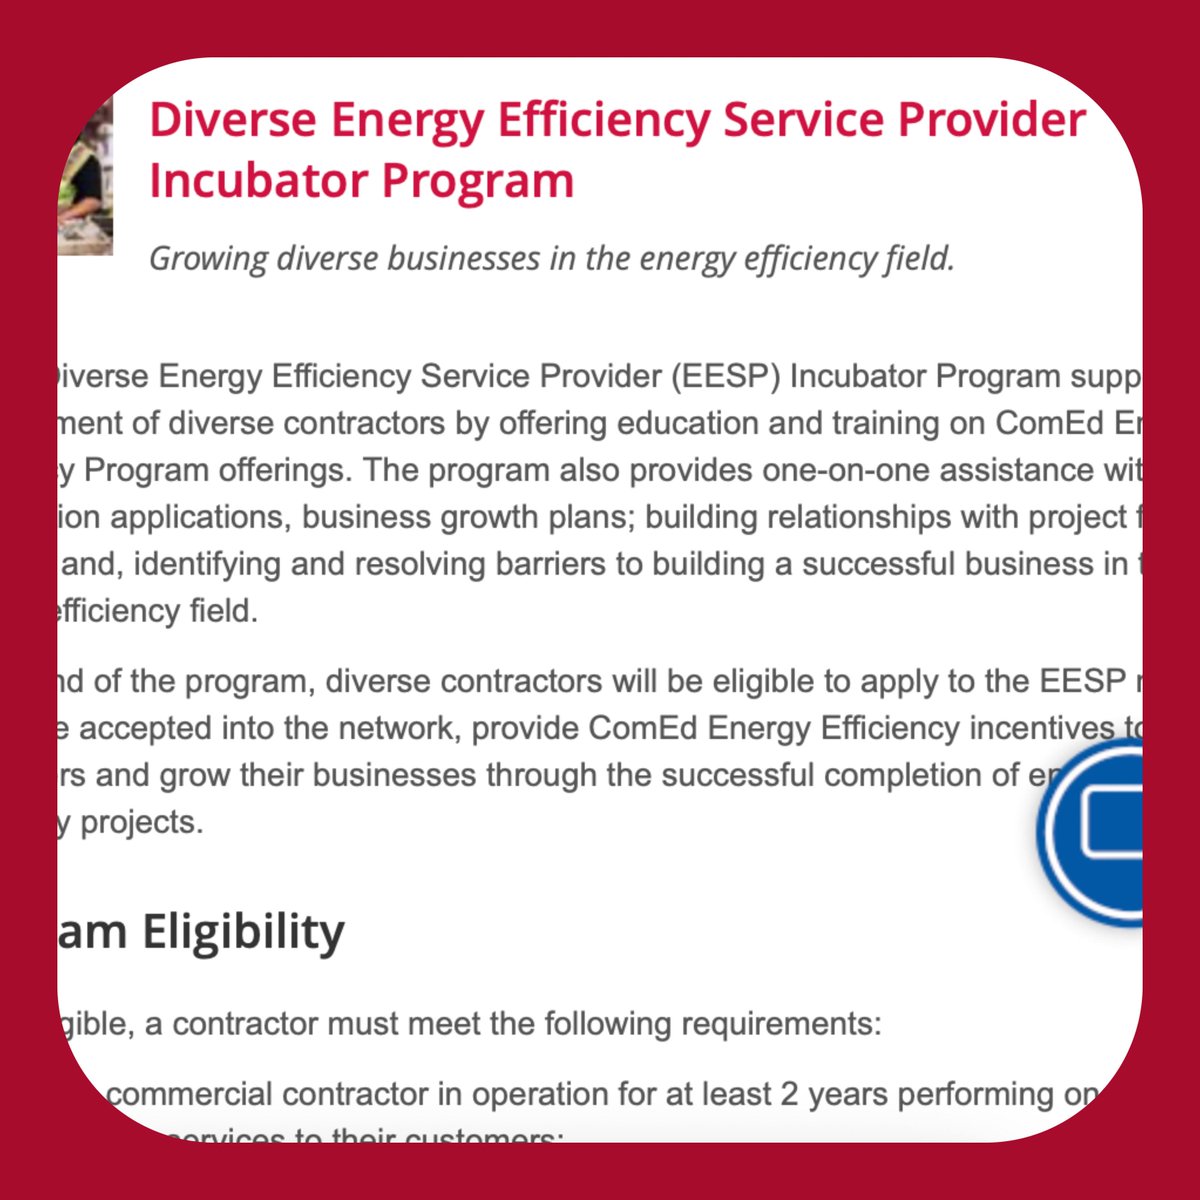 🎉Congrats to the 33 amazing graduates of @ComEd's Diverse #EnergyEfficiency Service Provider Incubator Program. Welcome to our #savetheplanet-thru-EE ecosystem. We're excited to have you on the team. Read more: businesswire.com/news/home/2022…